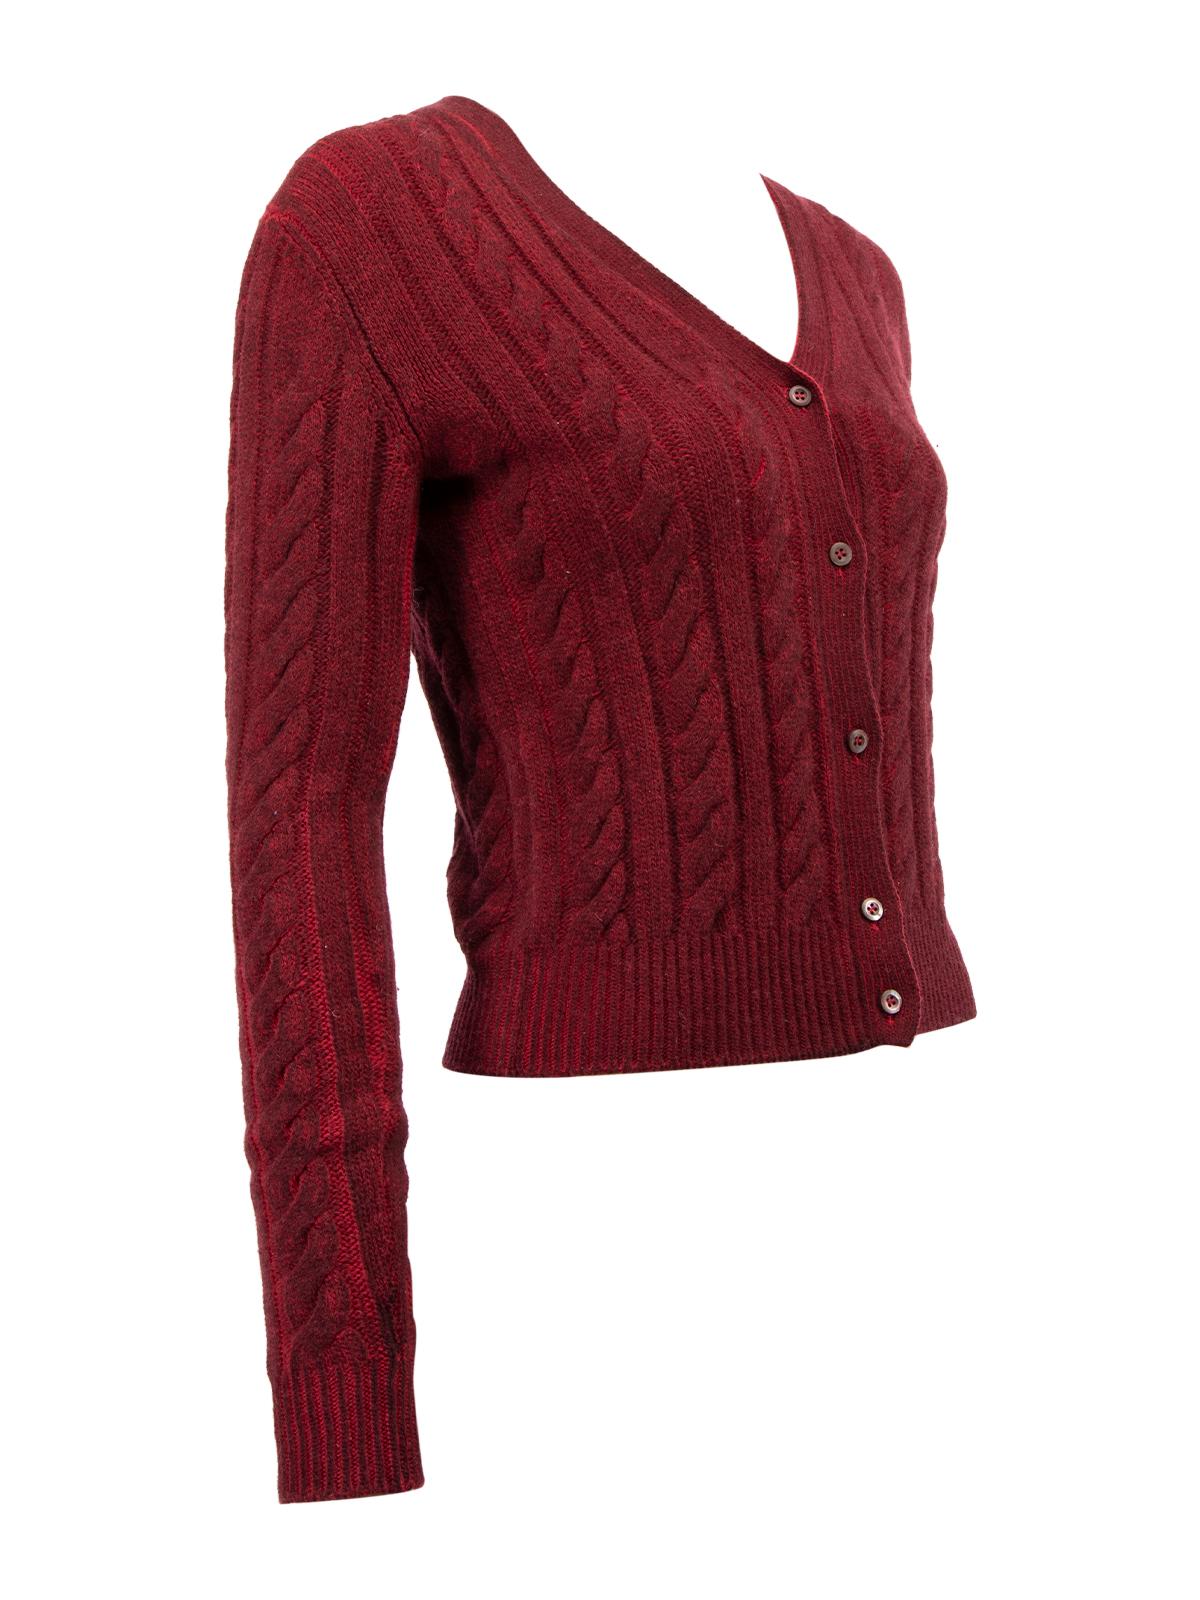 CONDITION is Very good. Minimal wear to cardigan is evident. Minimal wear to outer fabric where light pilling can be seen on this used Prada designer resale item. Details Burgundy Wool Cashmere Cable knit Form fitting Long sleeves V neck Front